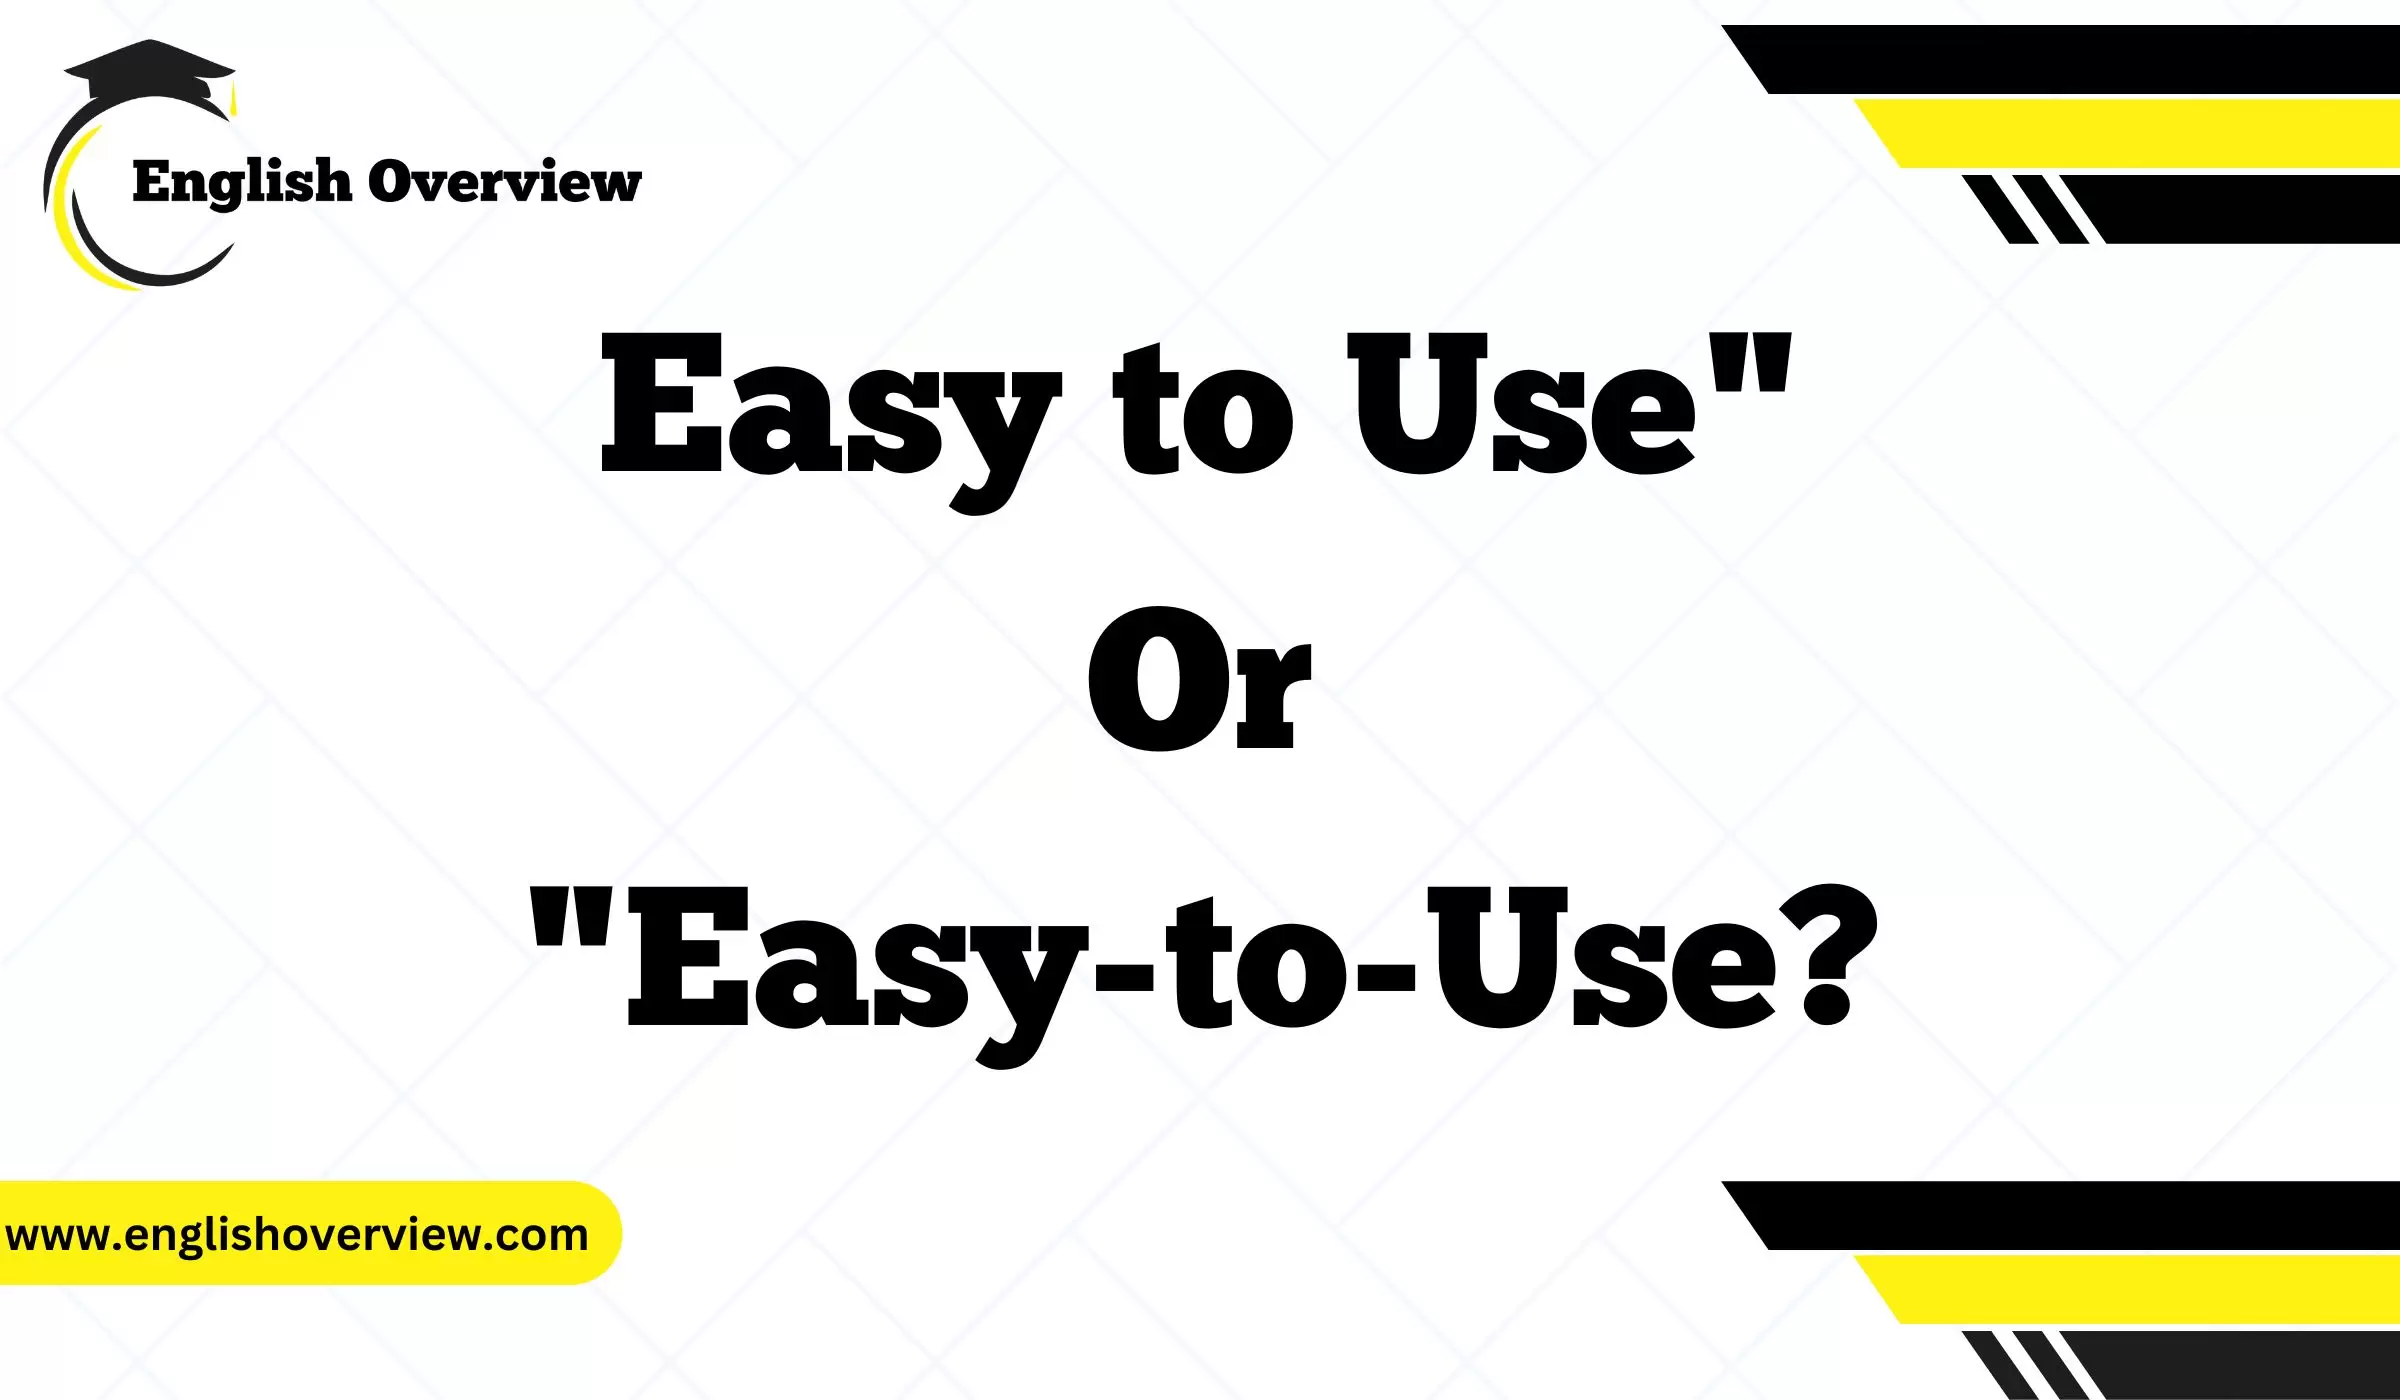 Easy to Use" or "Easy-to-Use